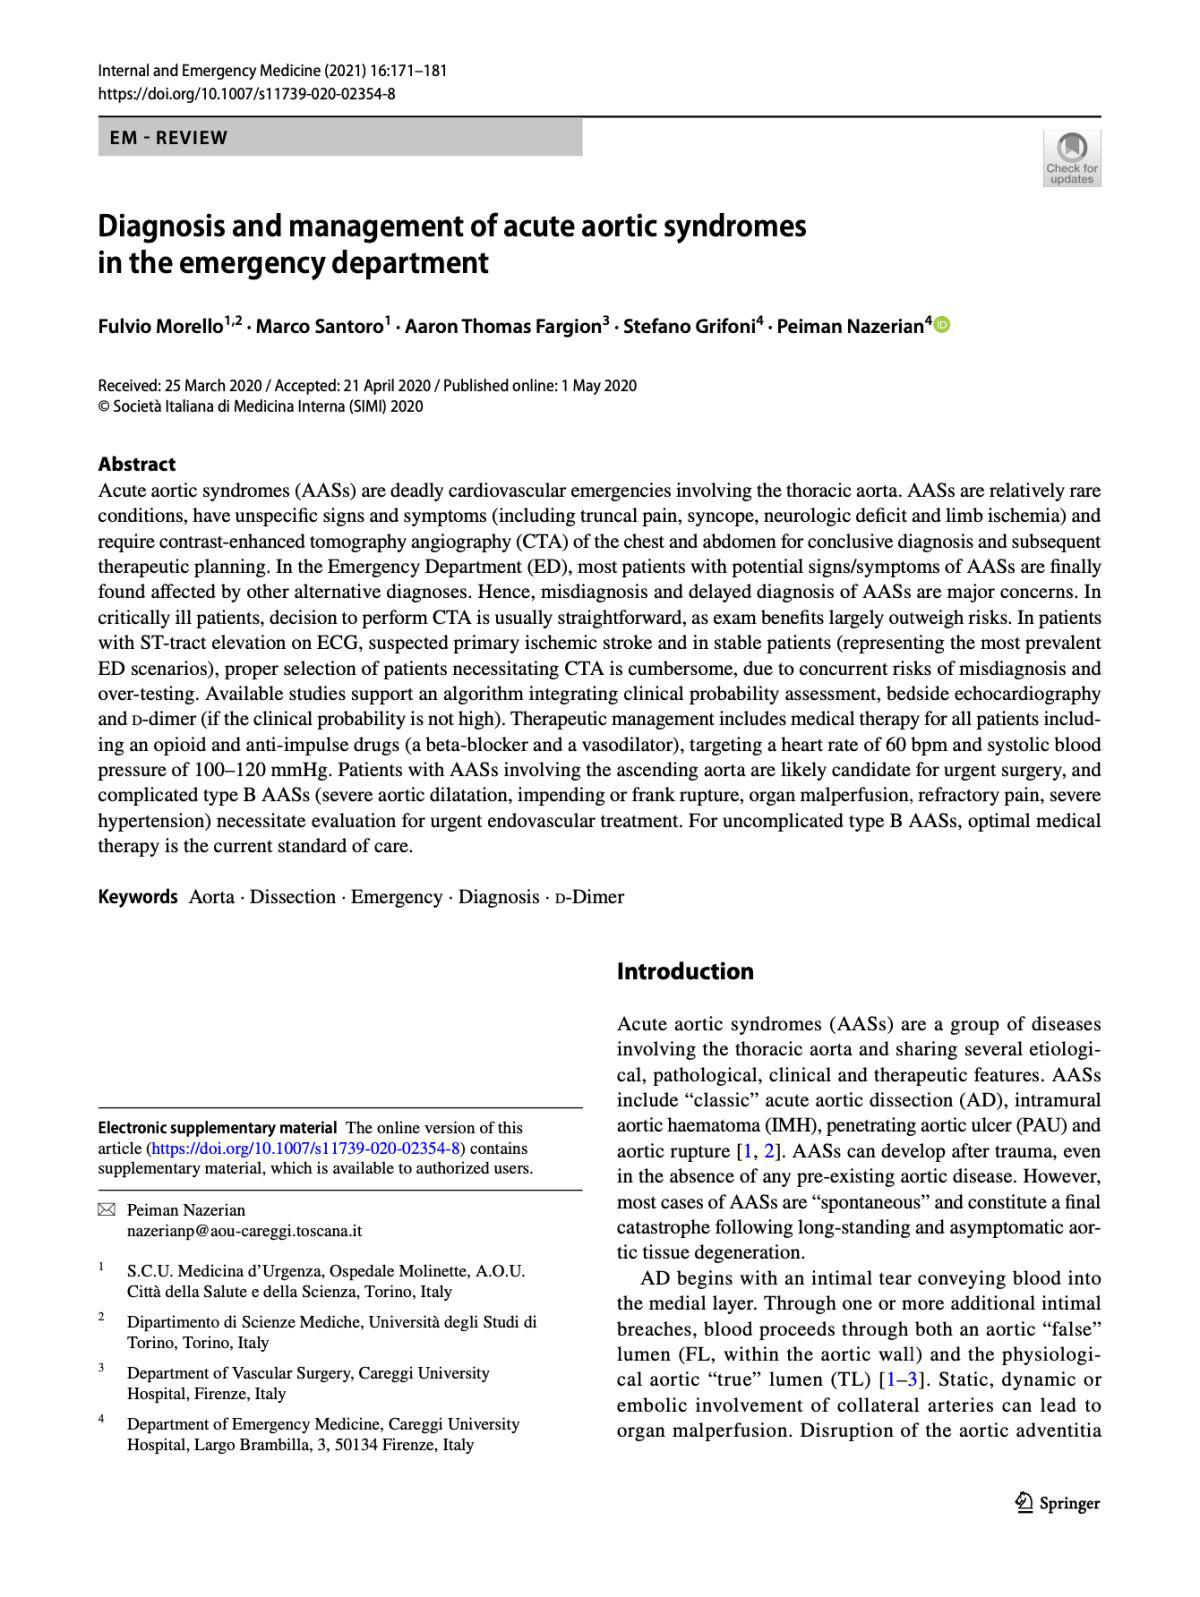 Diagnosis and management of acute aortic syndromes in the emergency department